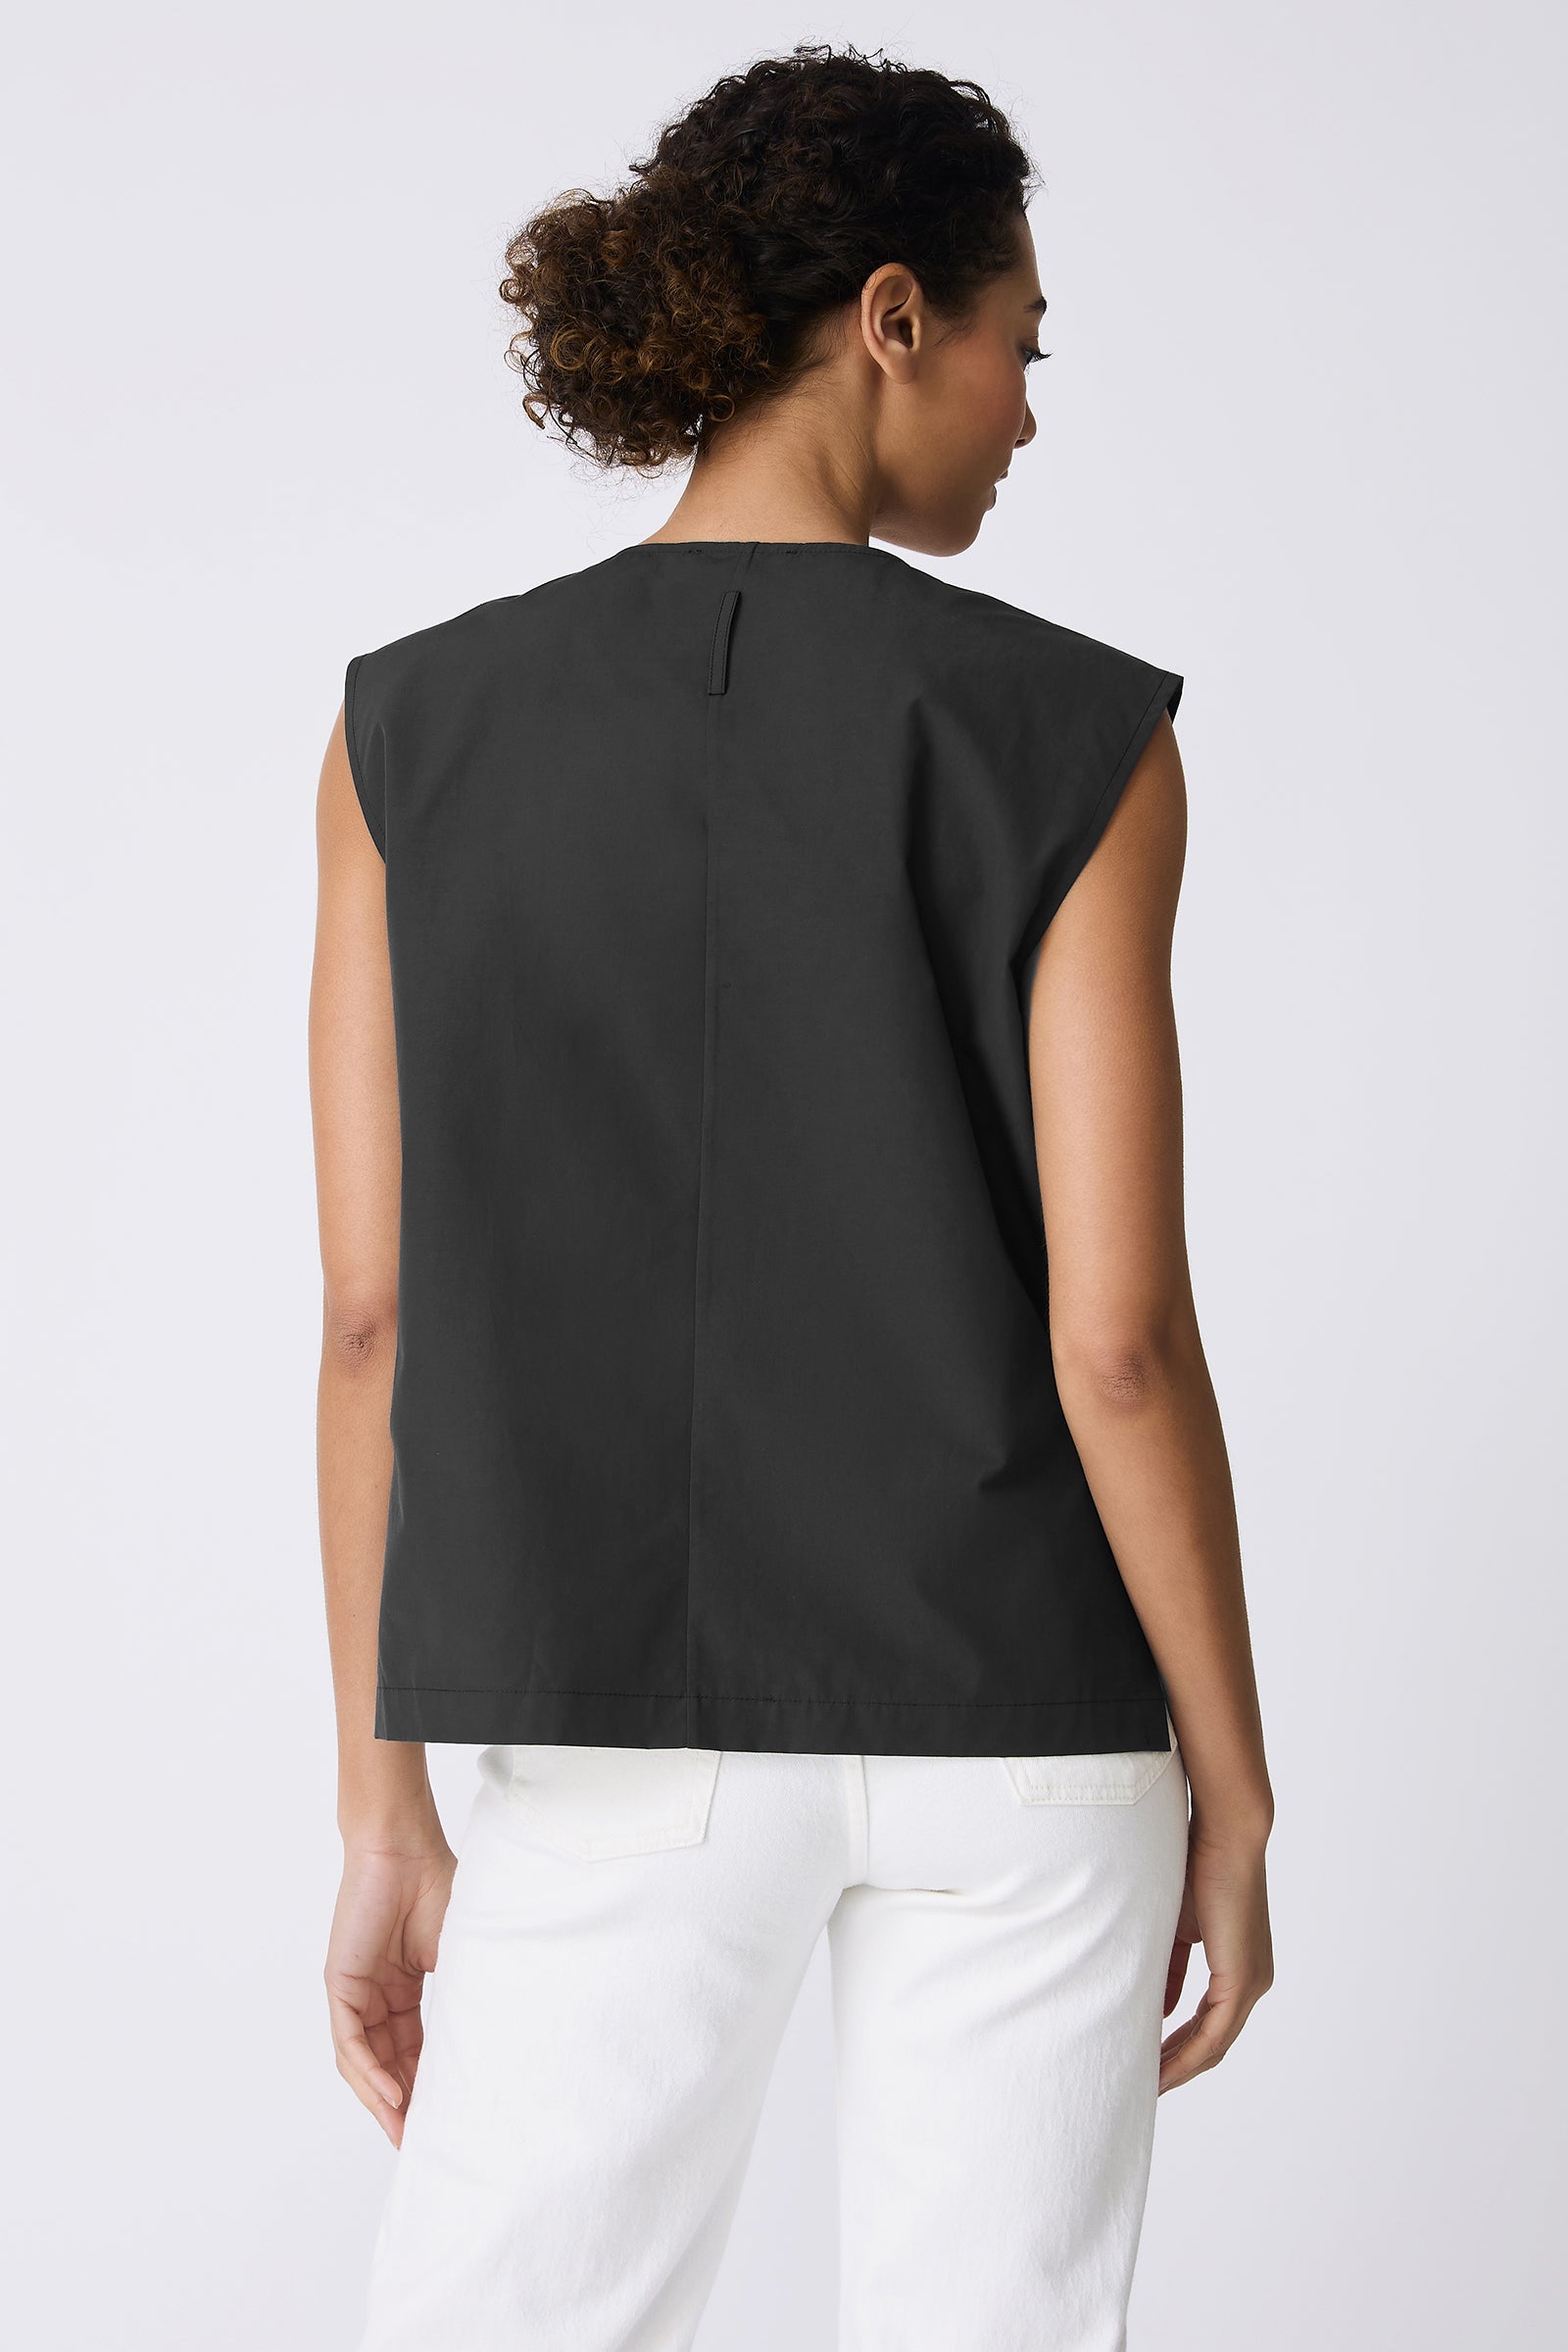 Kal Rieman Ava V-Neck Shell in Black on model touching neck front view